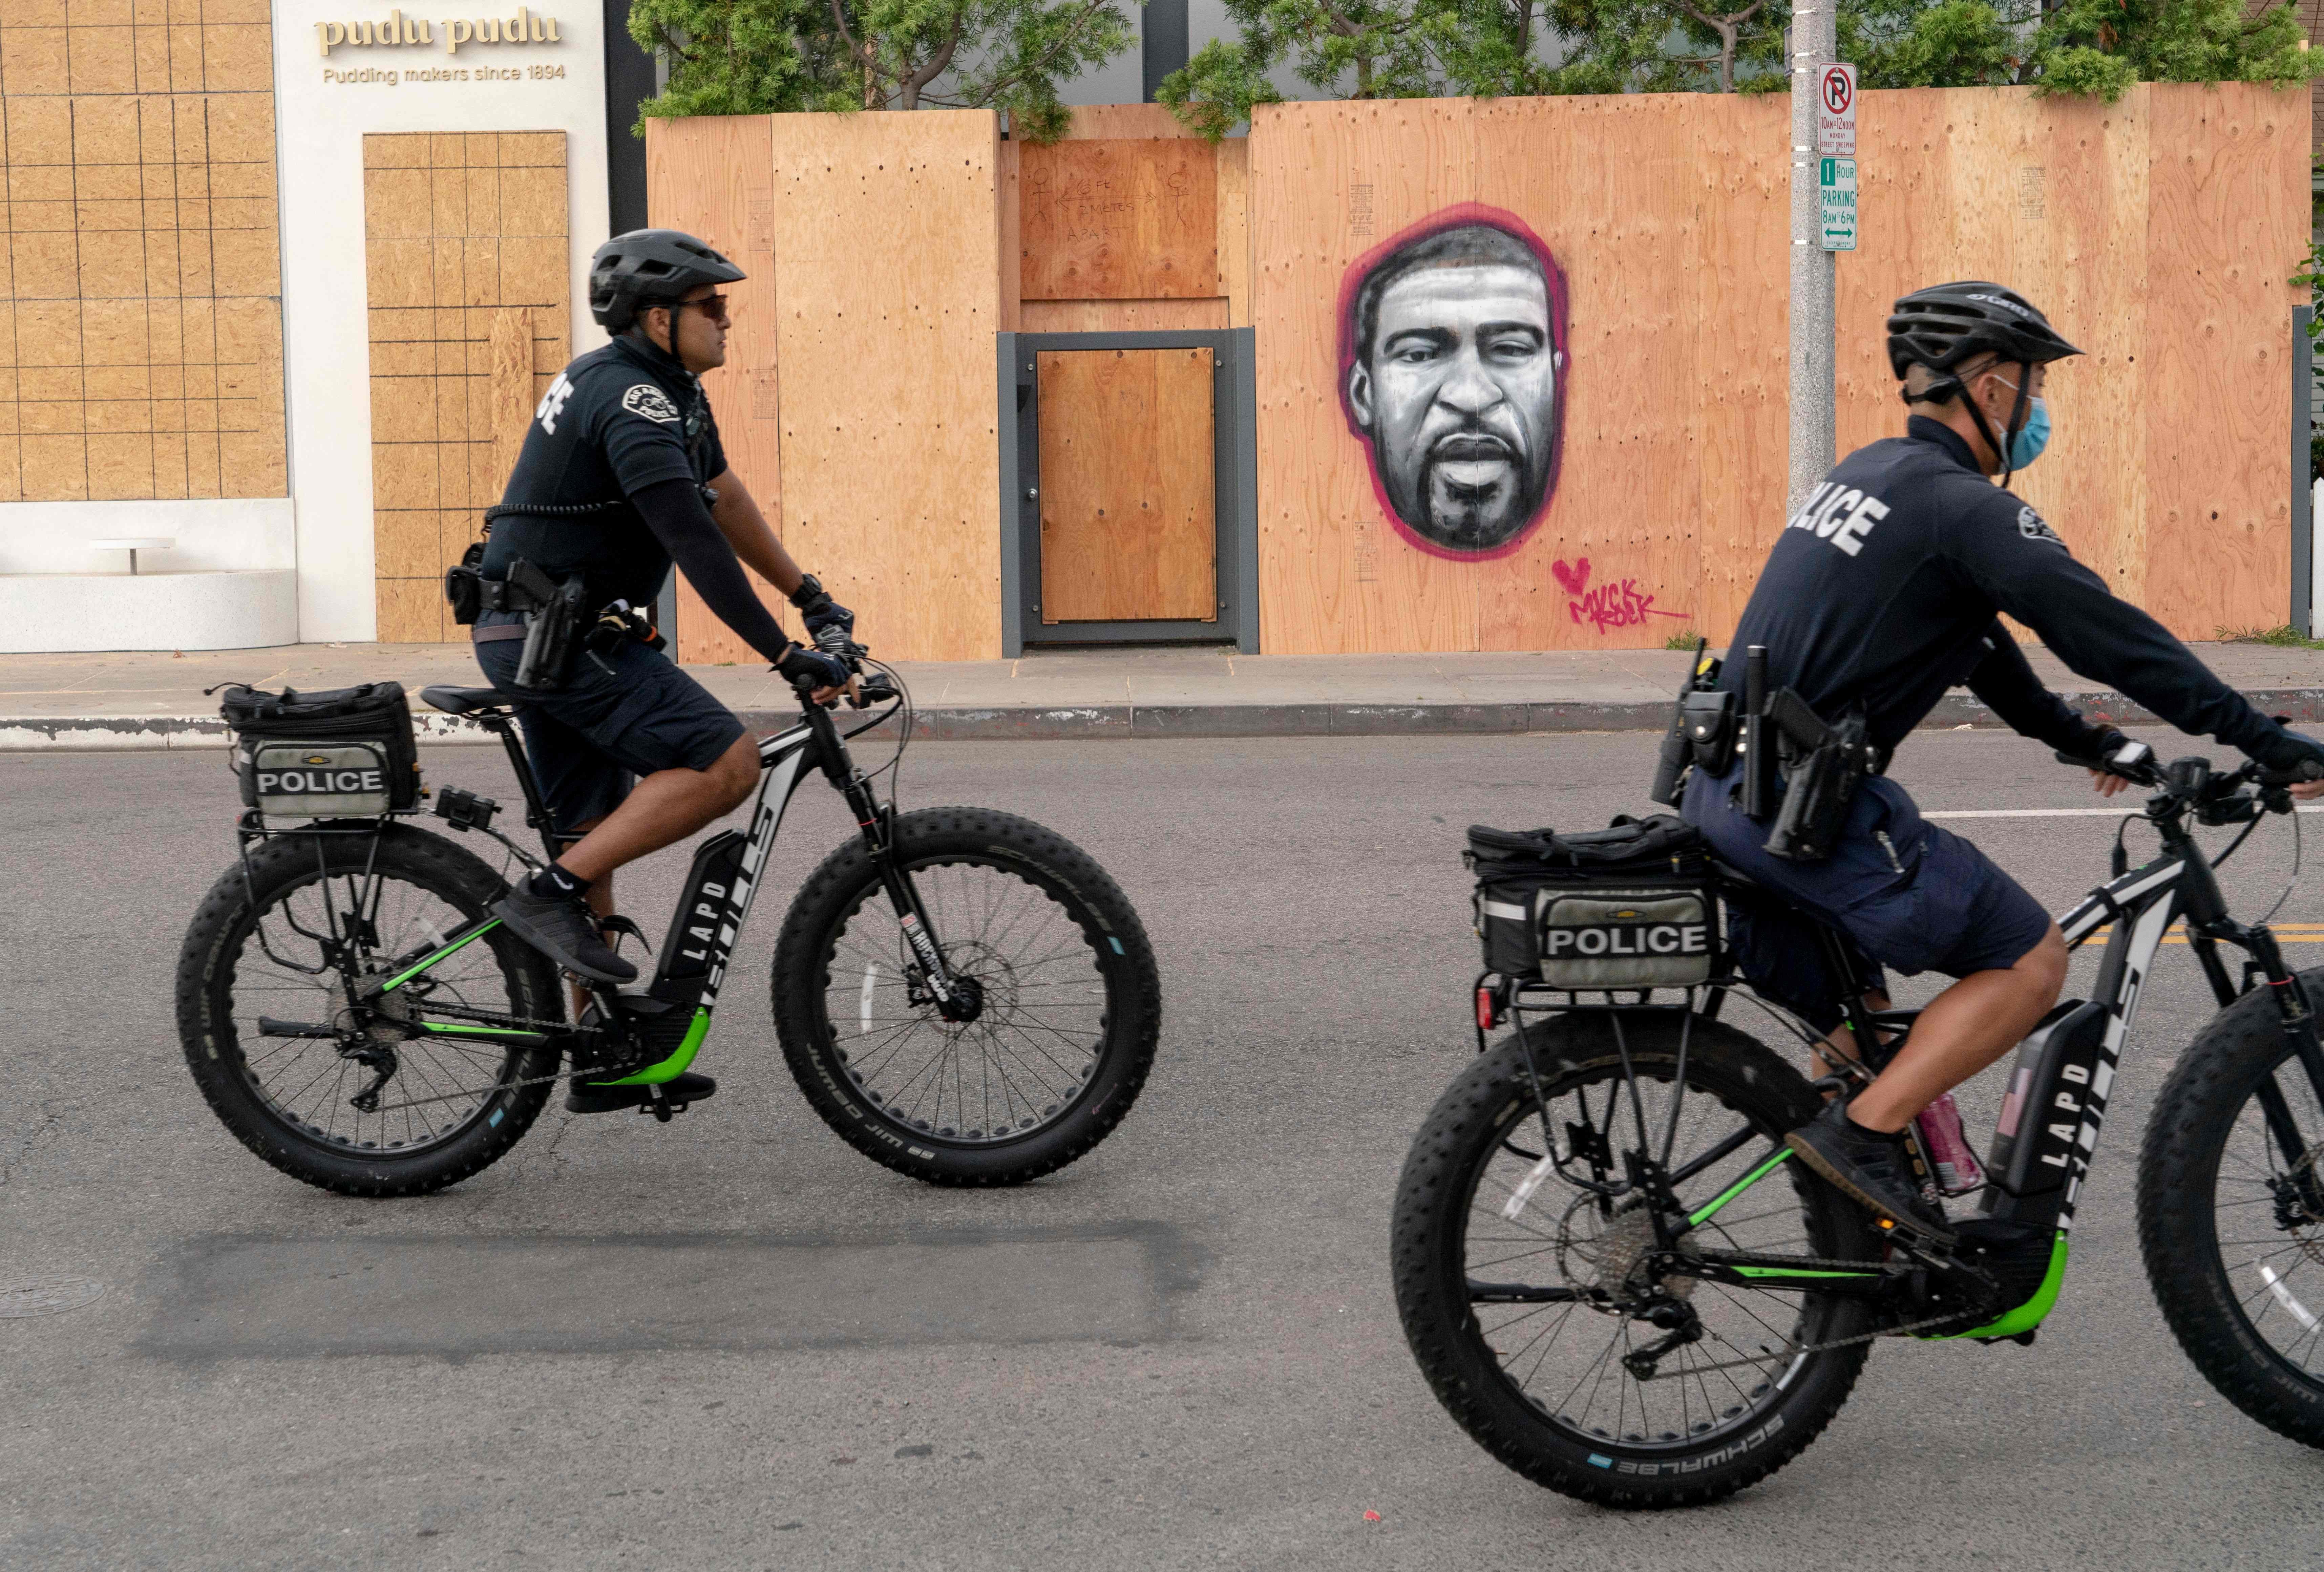 Police officers ride bicycles past a mural of George Floyd in the Venice area of Los Angeles on June 2, 2020.